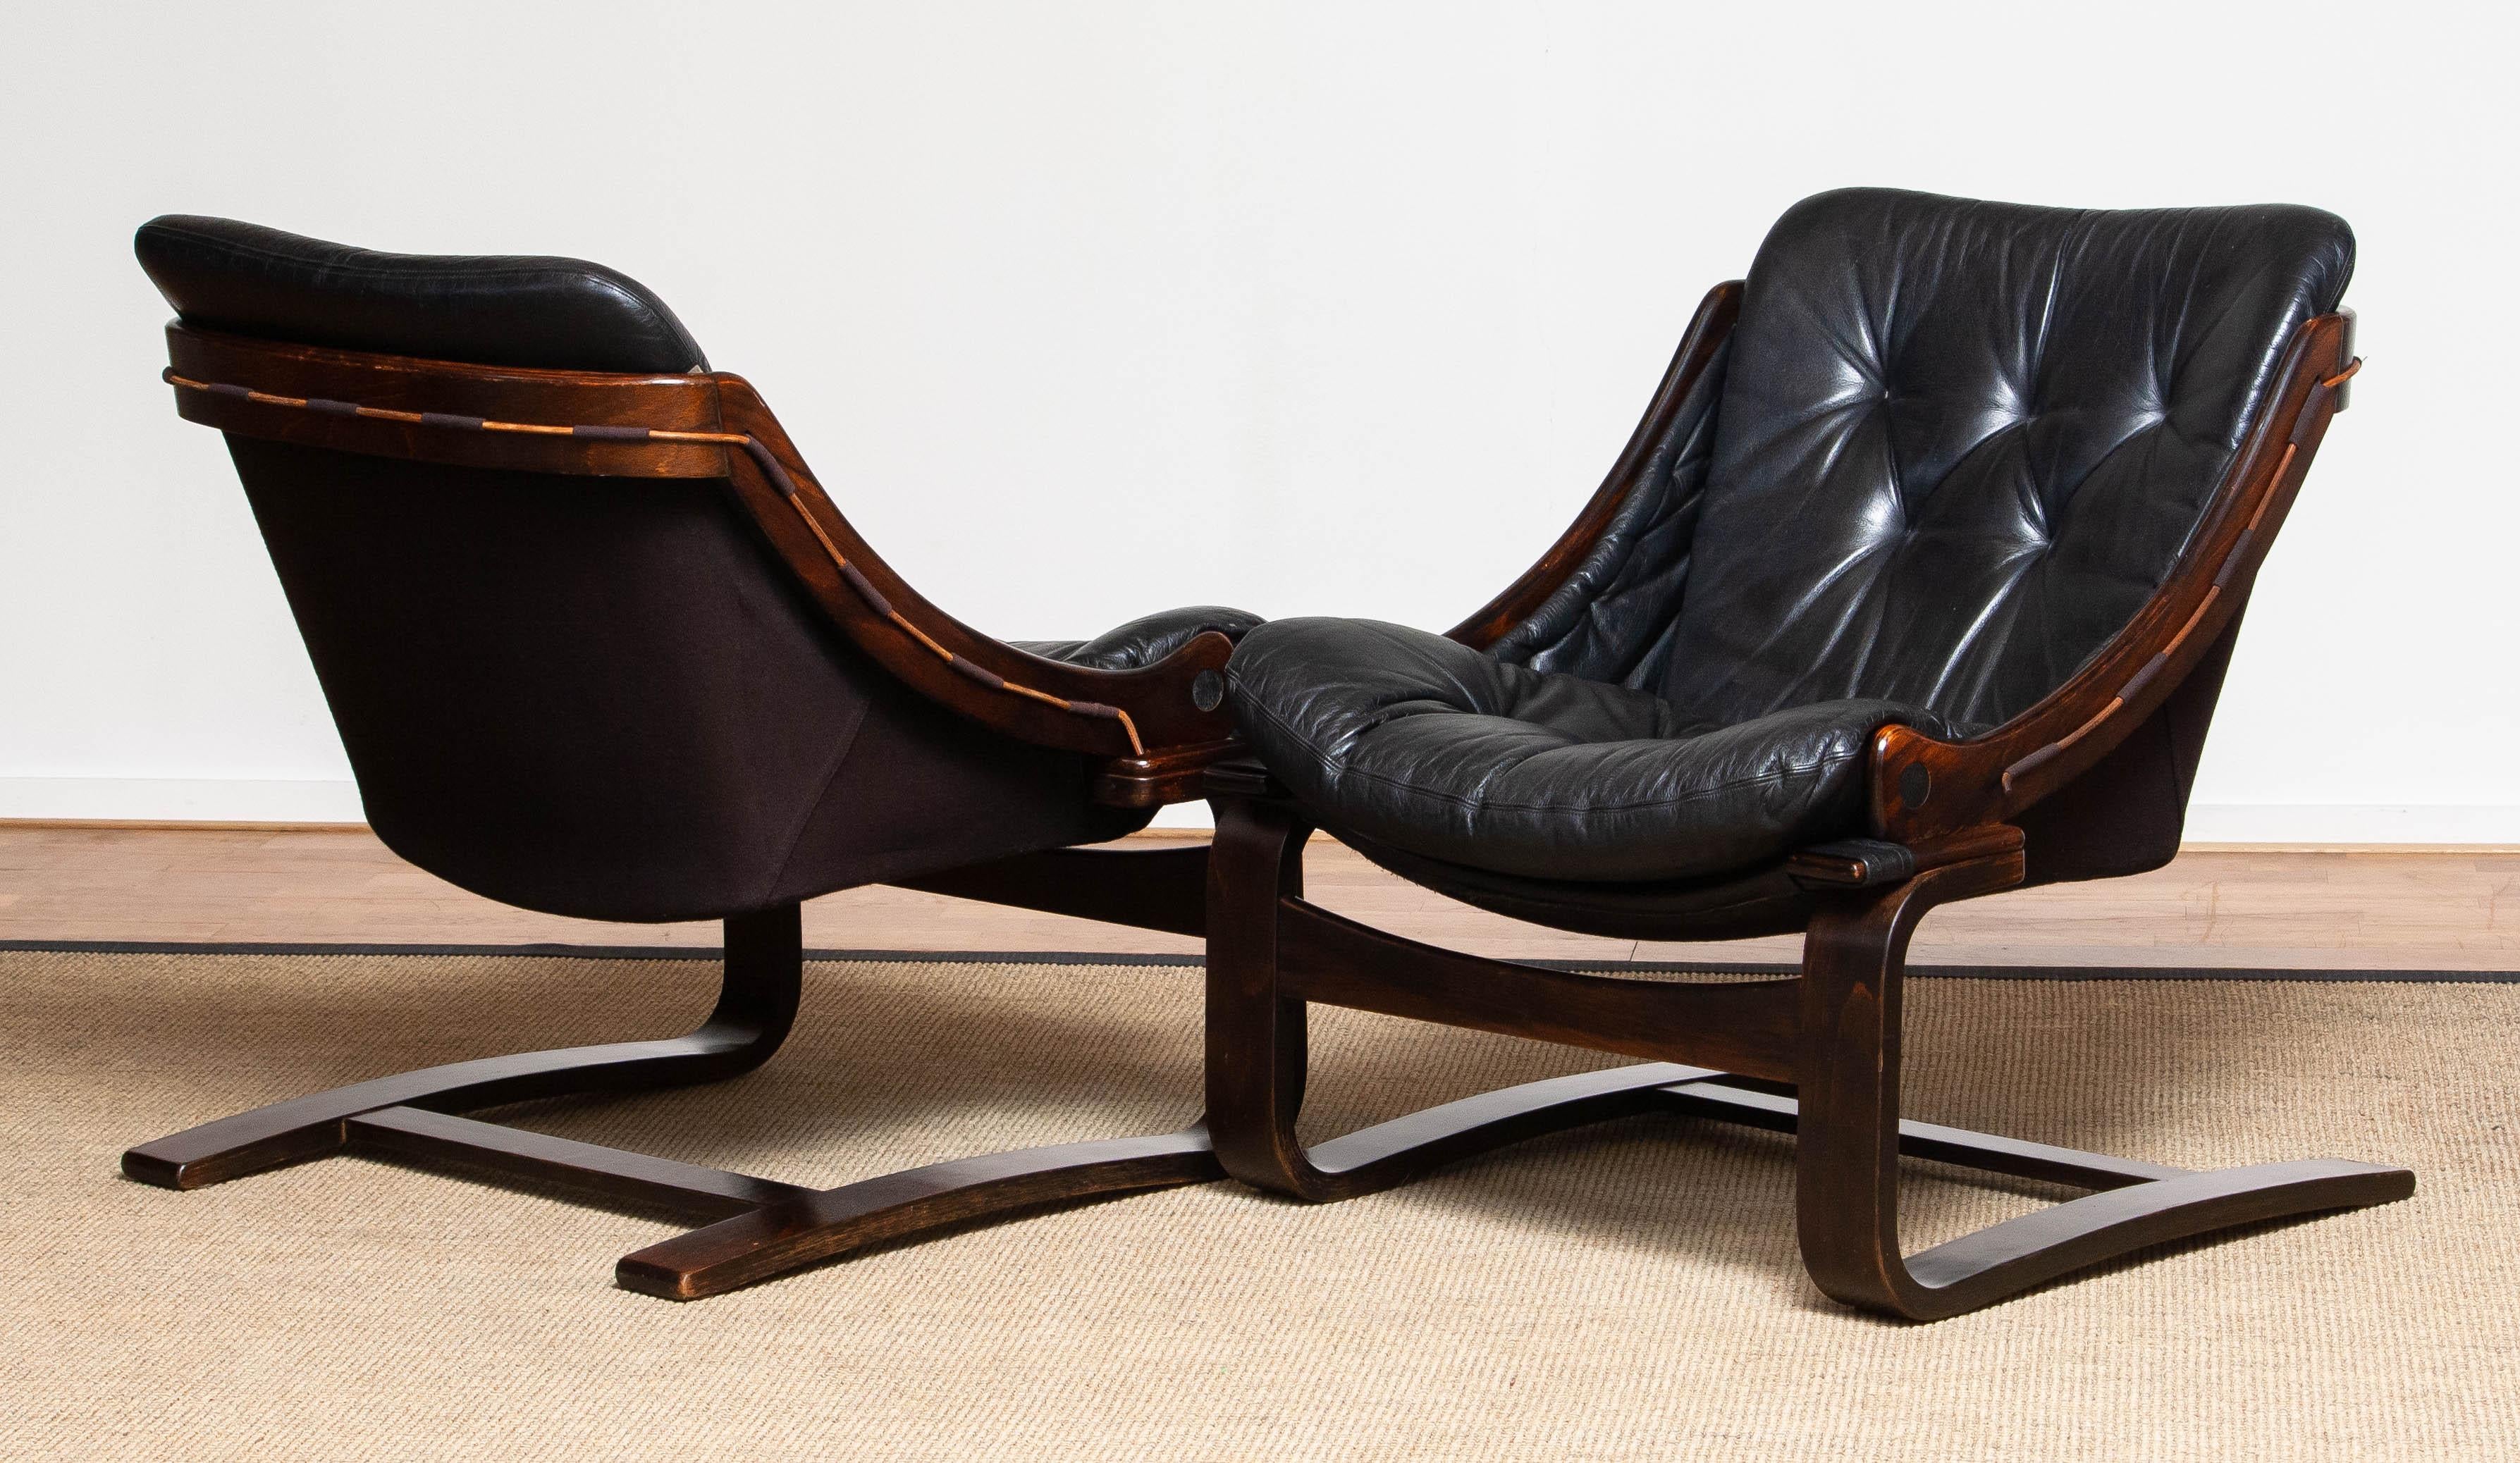 Scandinavian Modern 1970's Pair Black Leather Club / Lounge Chairs by Ake Fribytter for Nelo Sweden